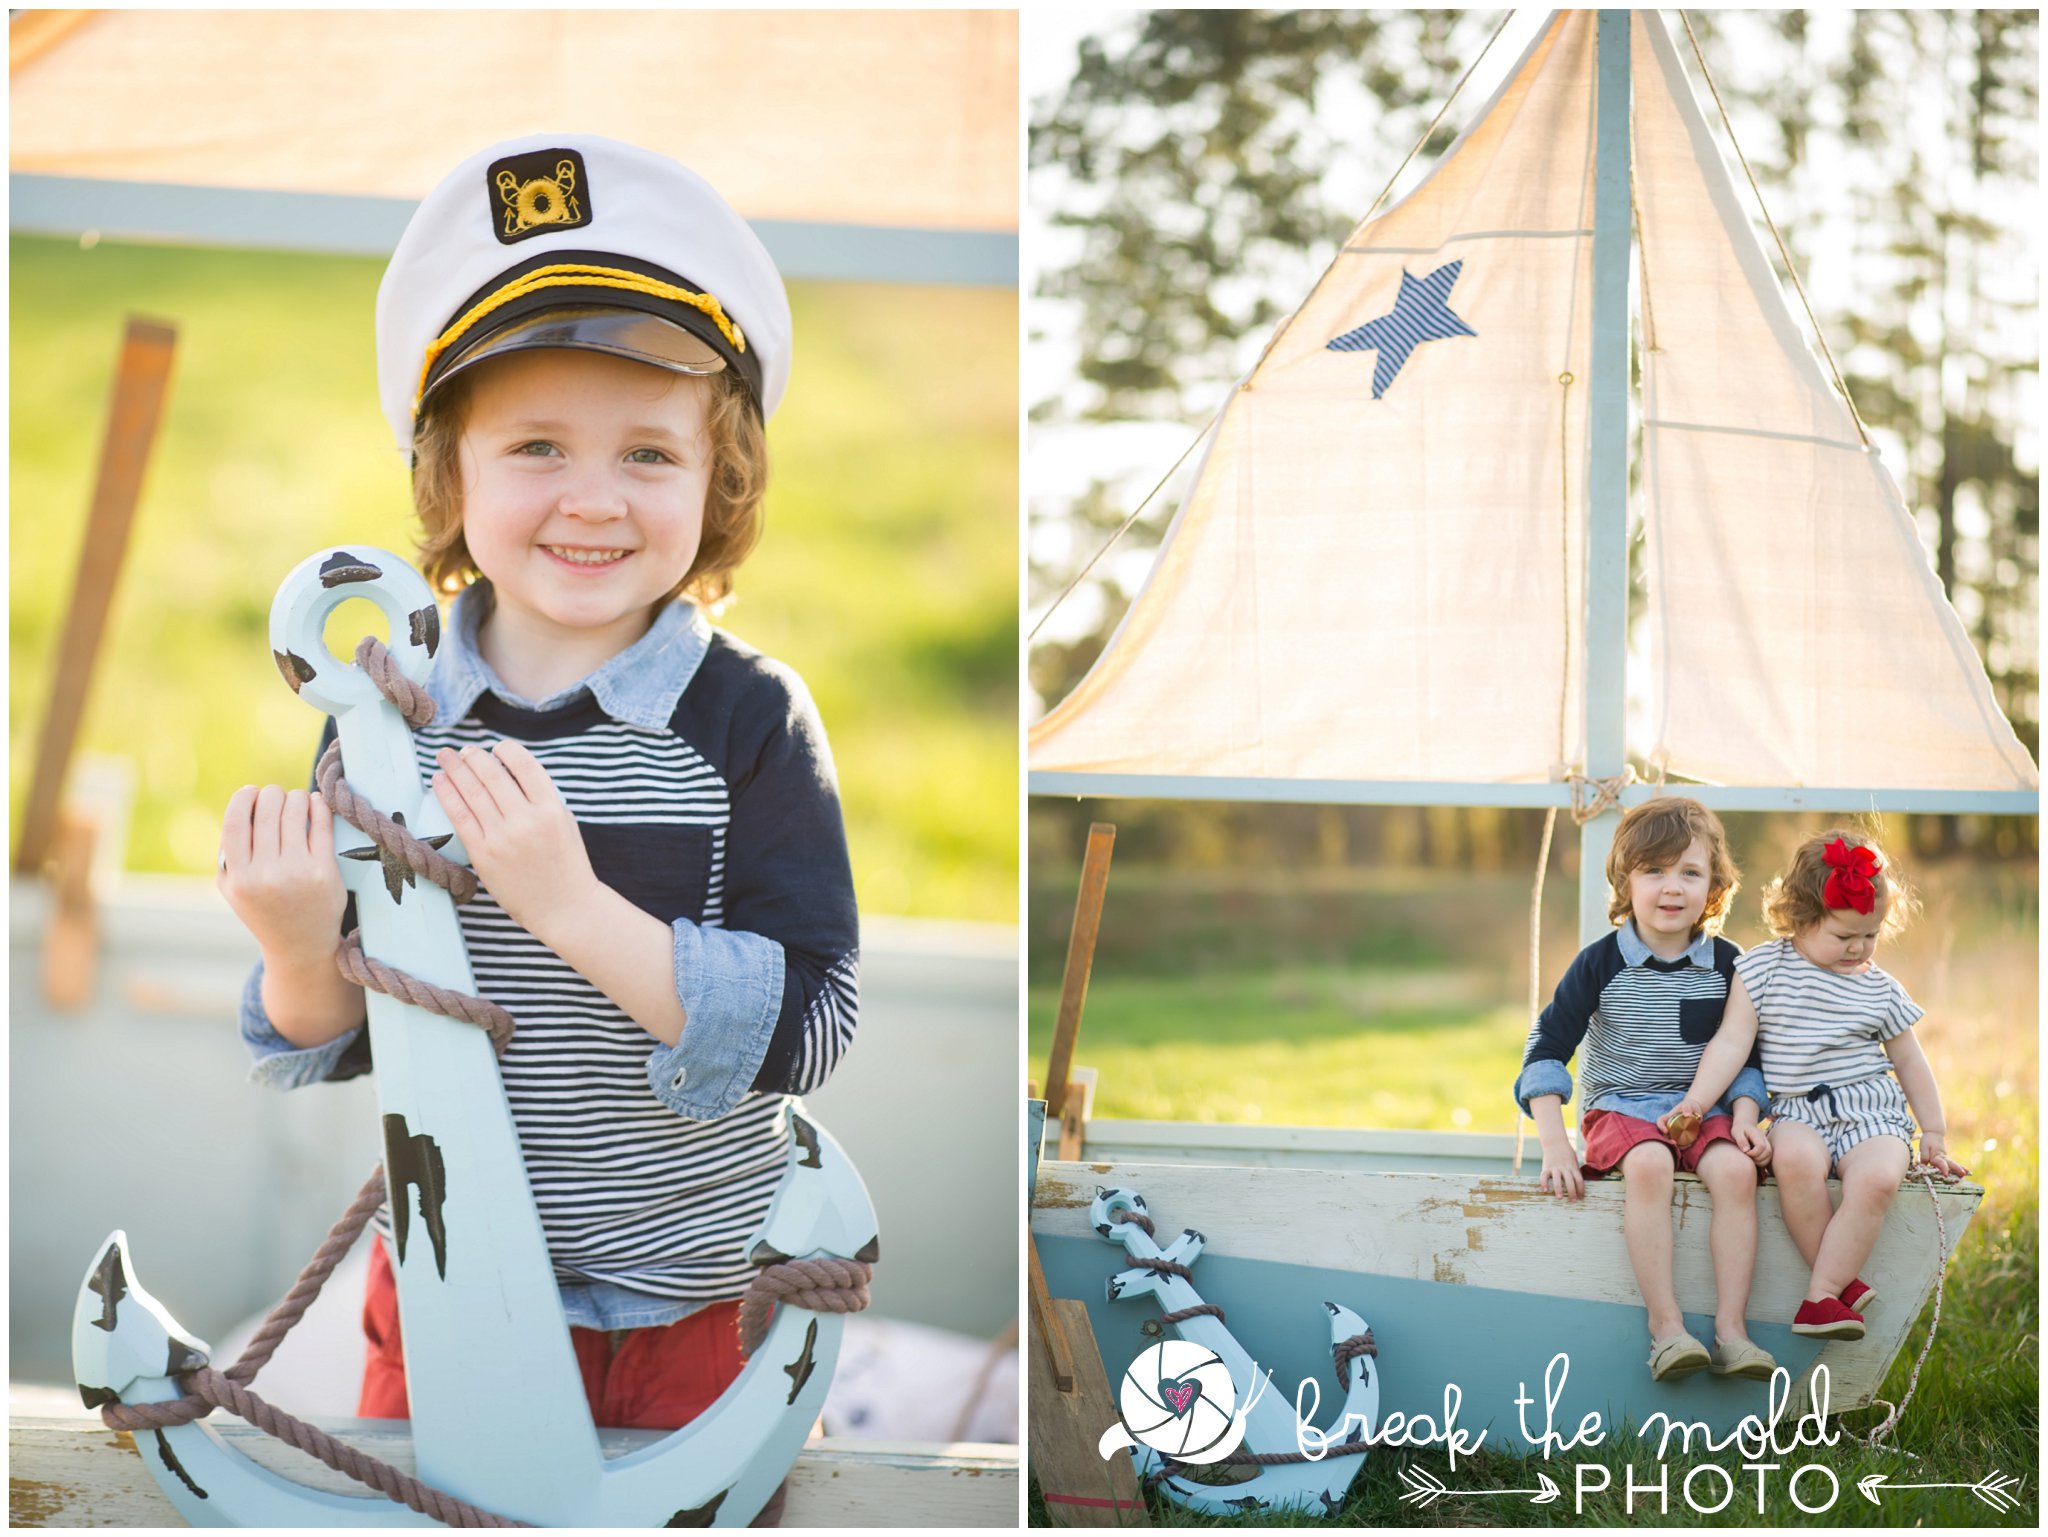 break-the-mold-photo-nautical-themed-mini-sessions-knoxville_3893.jpg